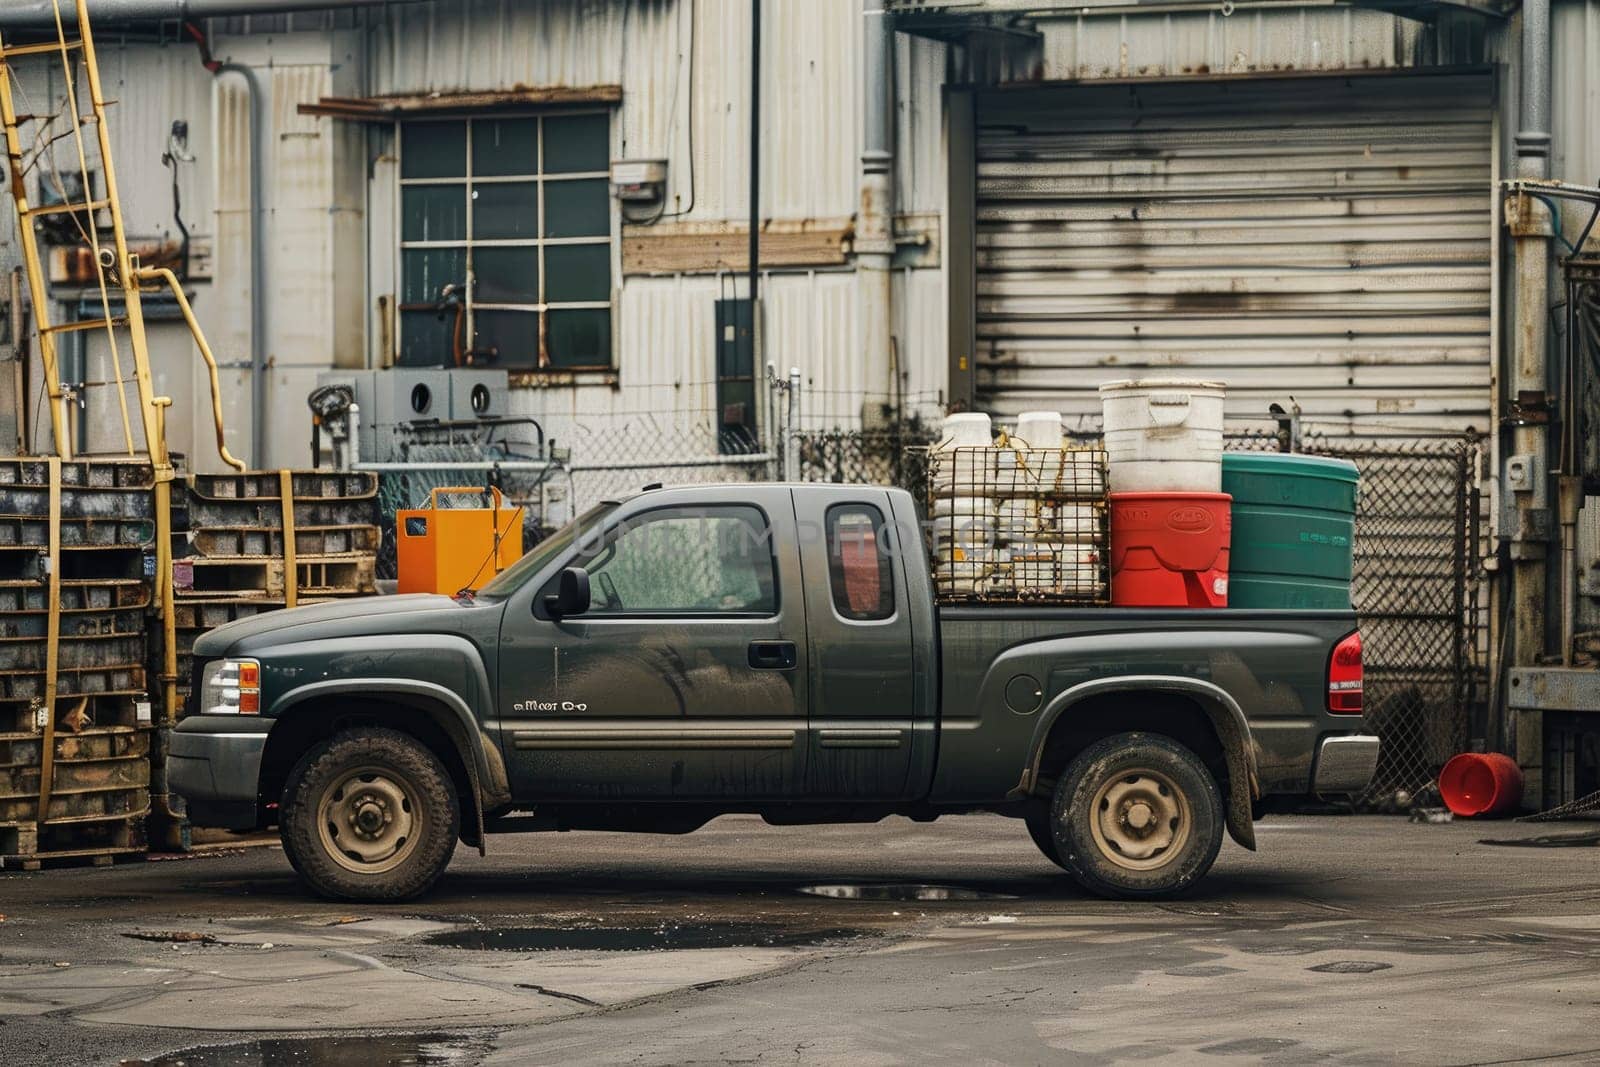 A pickup truck loaded with cargo in an industrial setting. by Chawagen